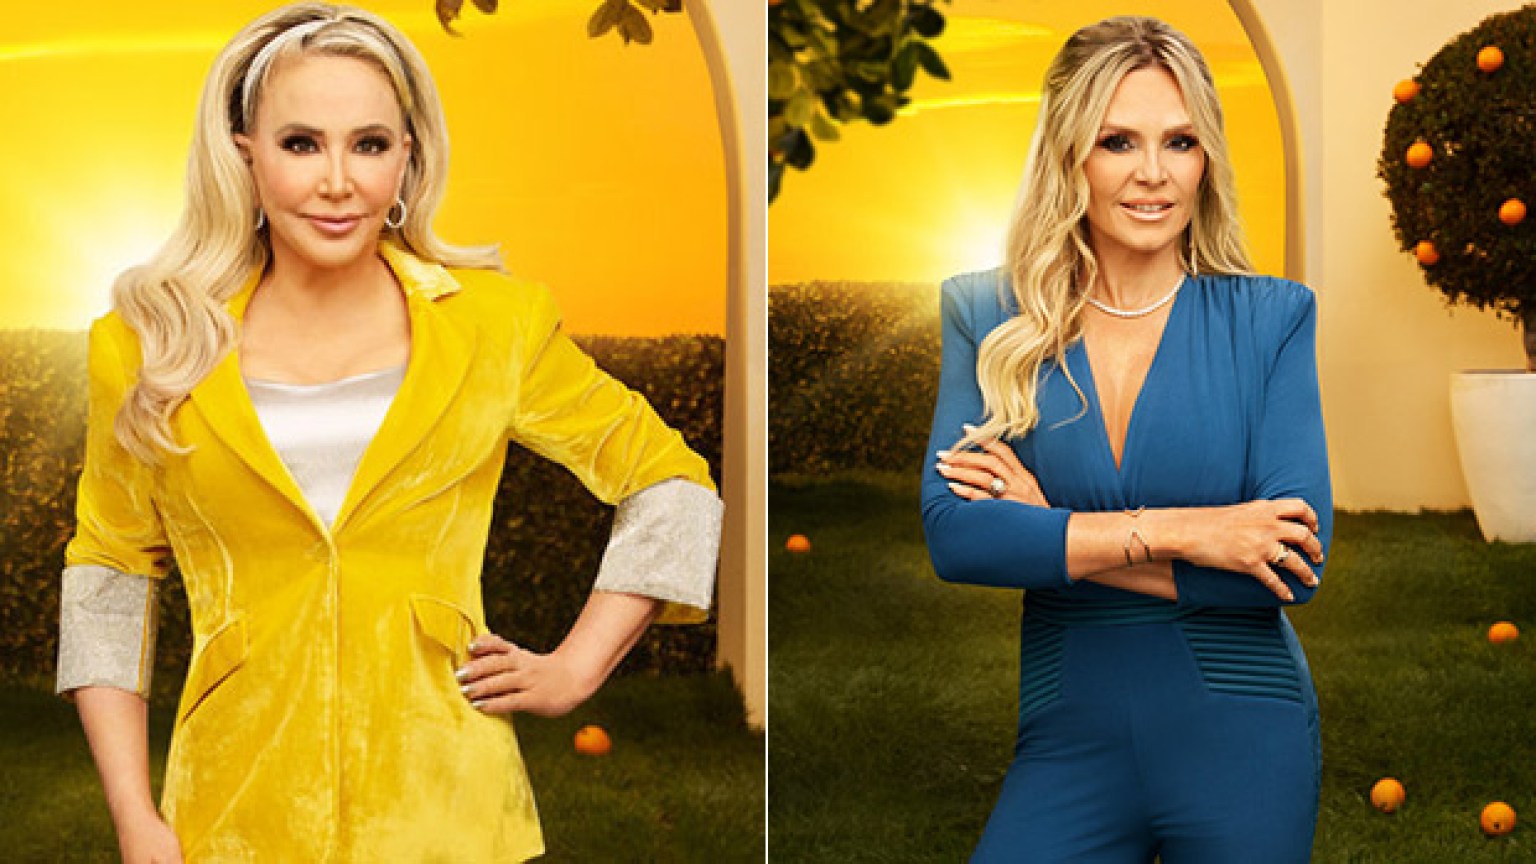 RHOC: Tamra Judge Goes Topless, Shannon Beador’s Relationship Issues ...